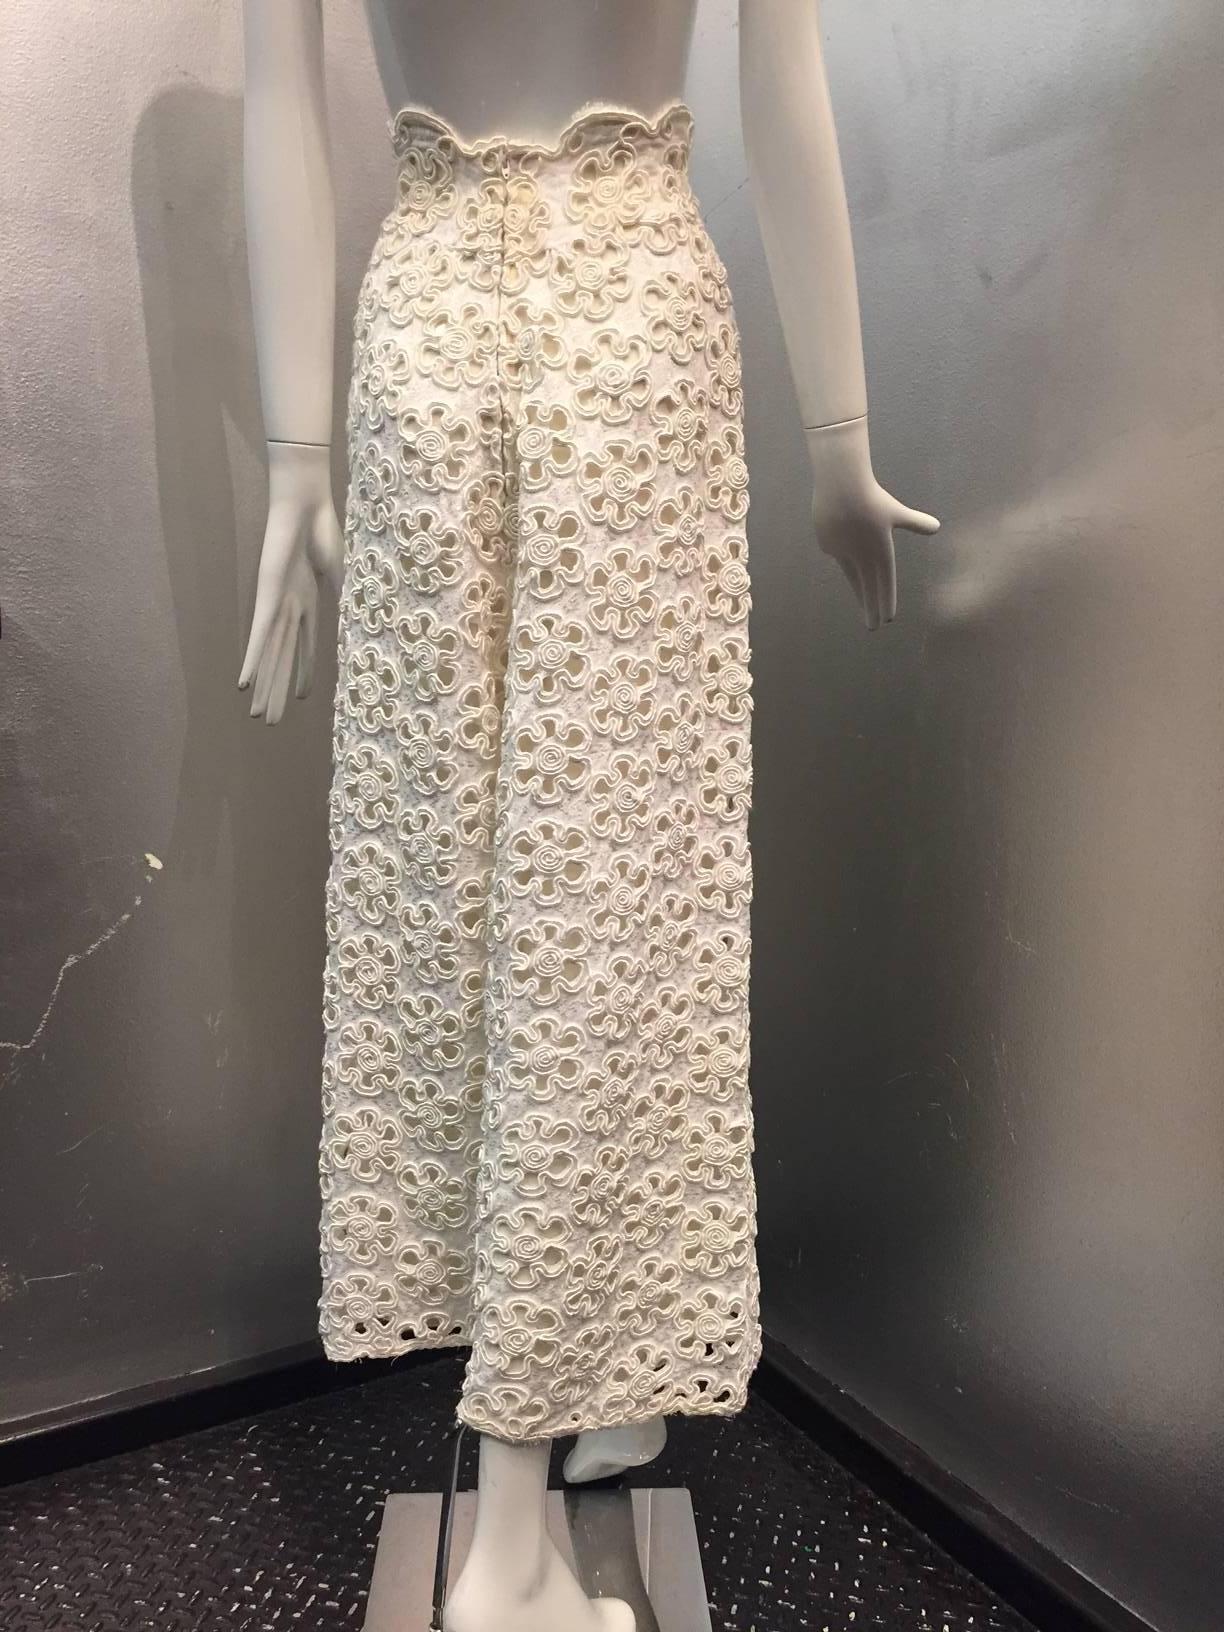 1960s James Galanos Mod Cream Embroidered Eyelet Lace 3-Piece Pant Suit In Excellent Condition For Sale In Gresham, OR